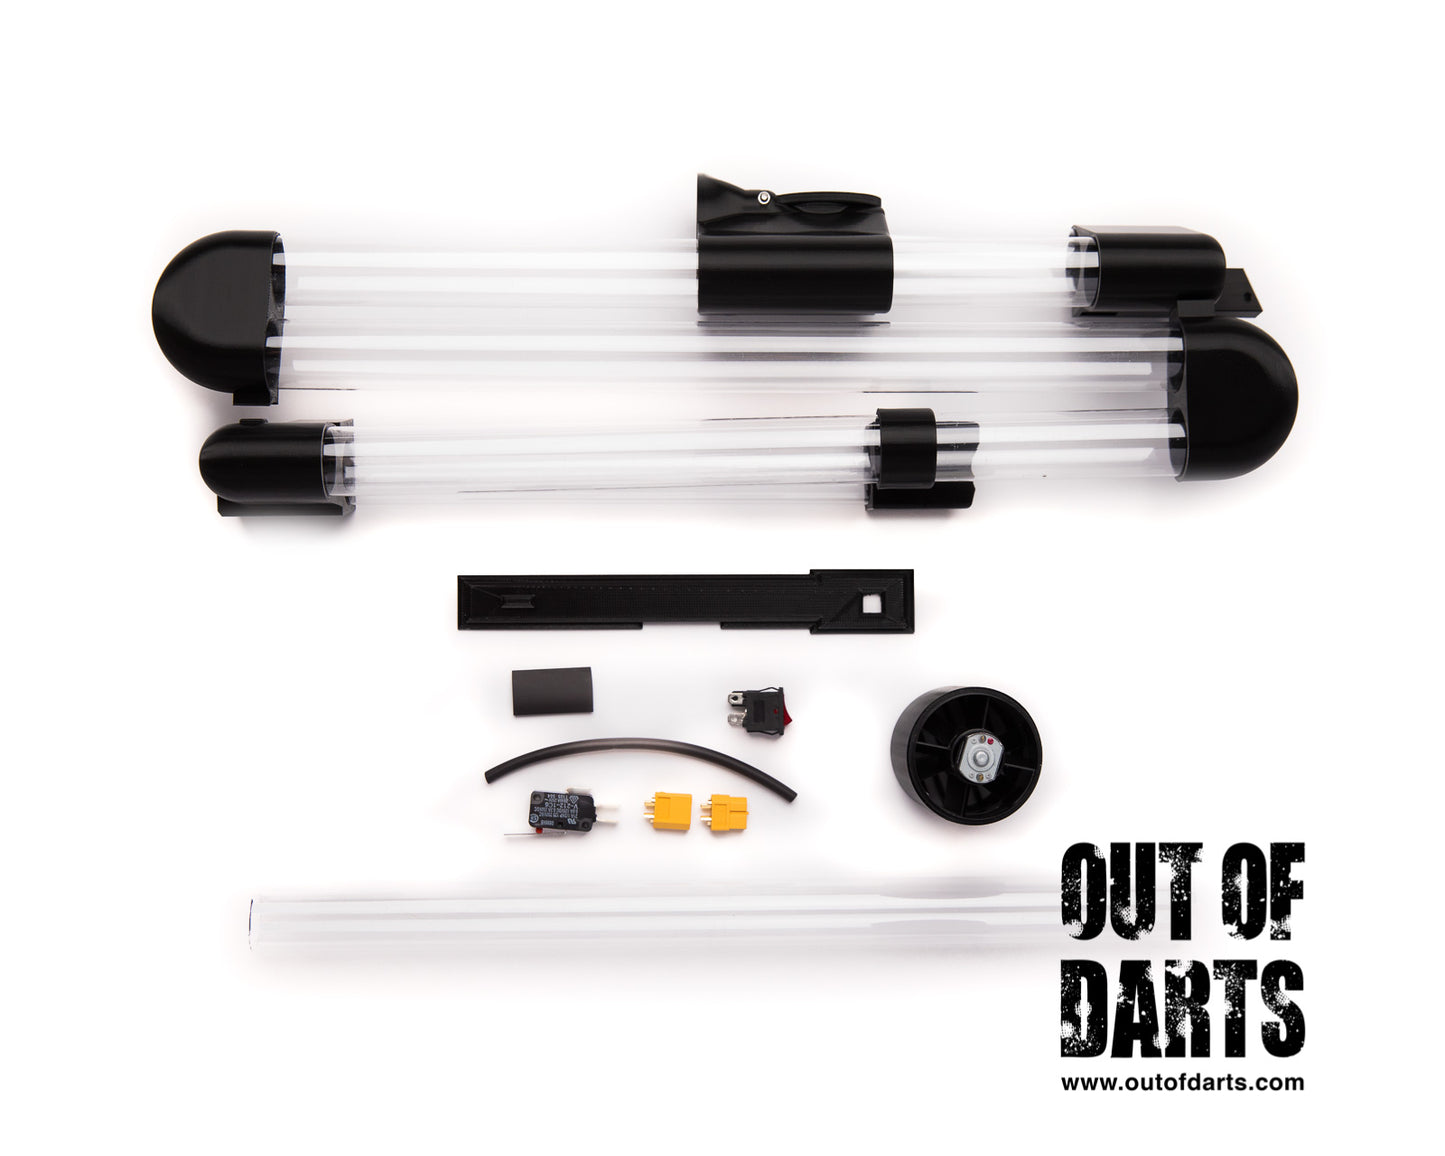 Nerf mod Nerf Rival Zeus "HIRricane" Kit by OutofDarts - Blaster/battery/charger NOT included! (85 round capacity) - Out of Darts